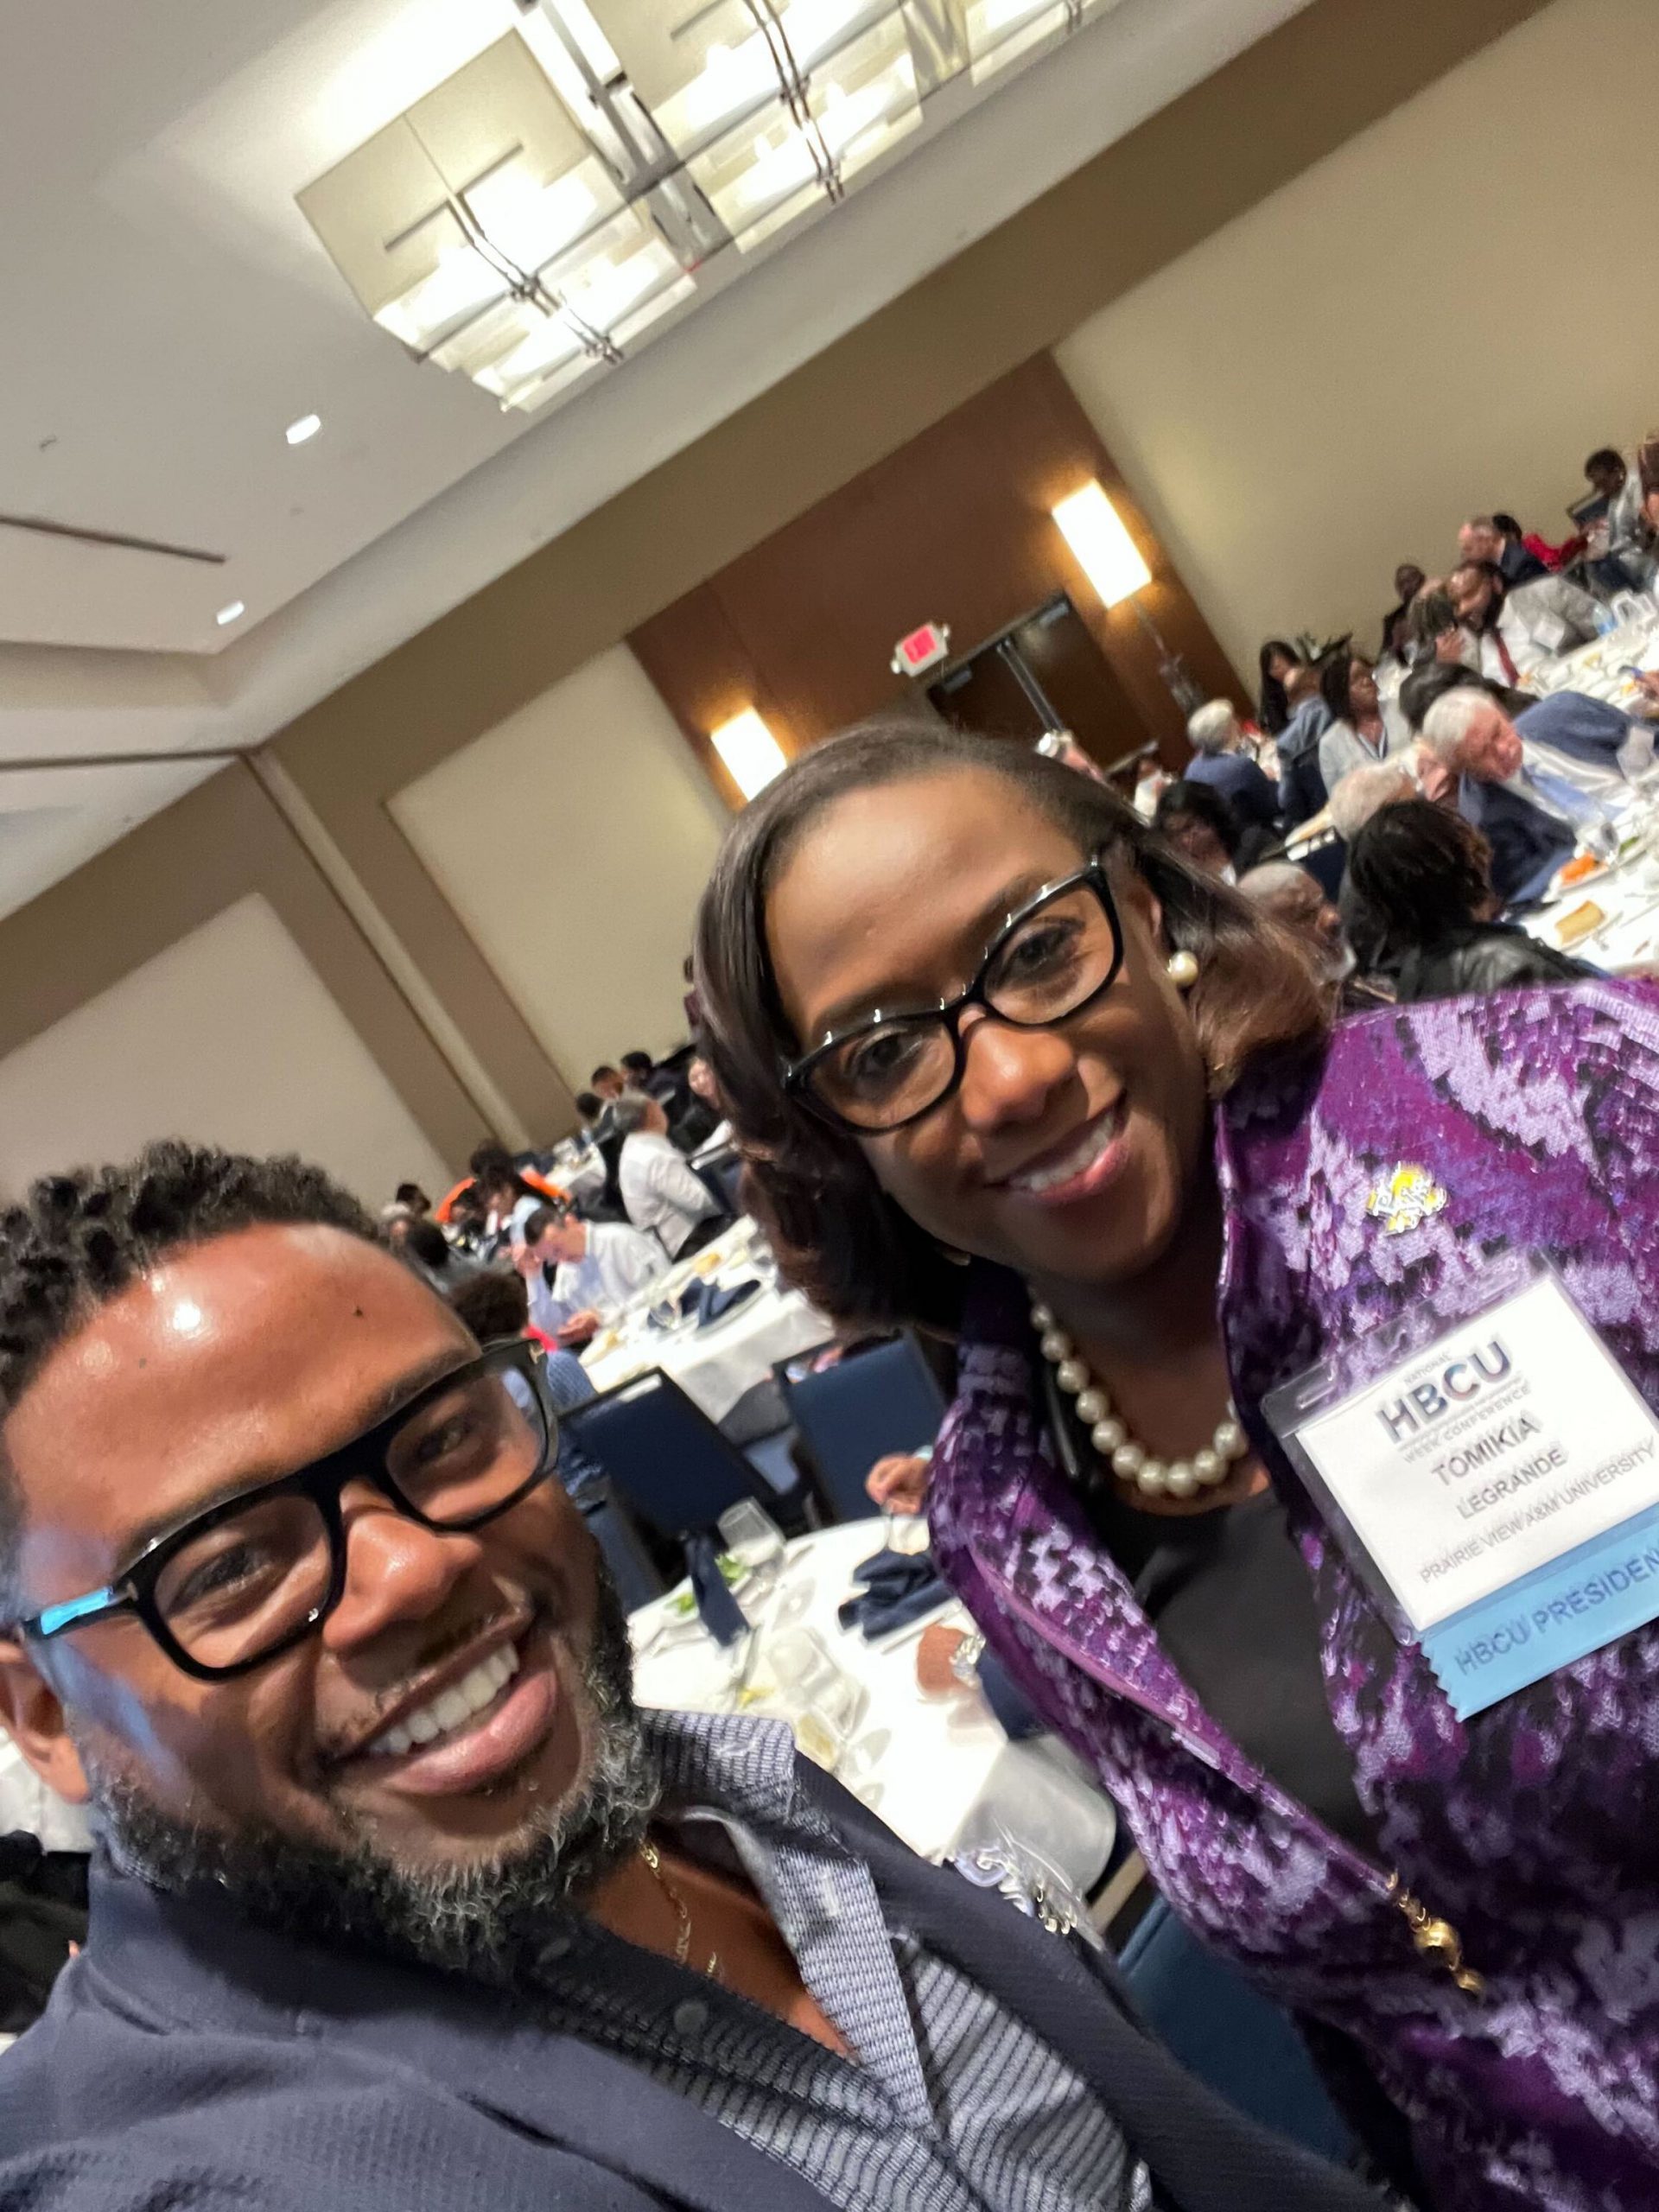 Sean-Reed McGee, CEO of FocusQuest, at the HBCU conference with Tomikia LeGrande, President of Prairie View A&M University